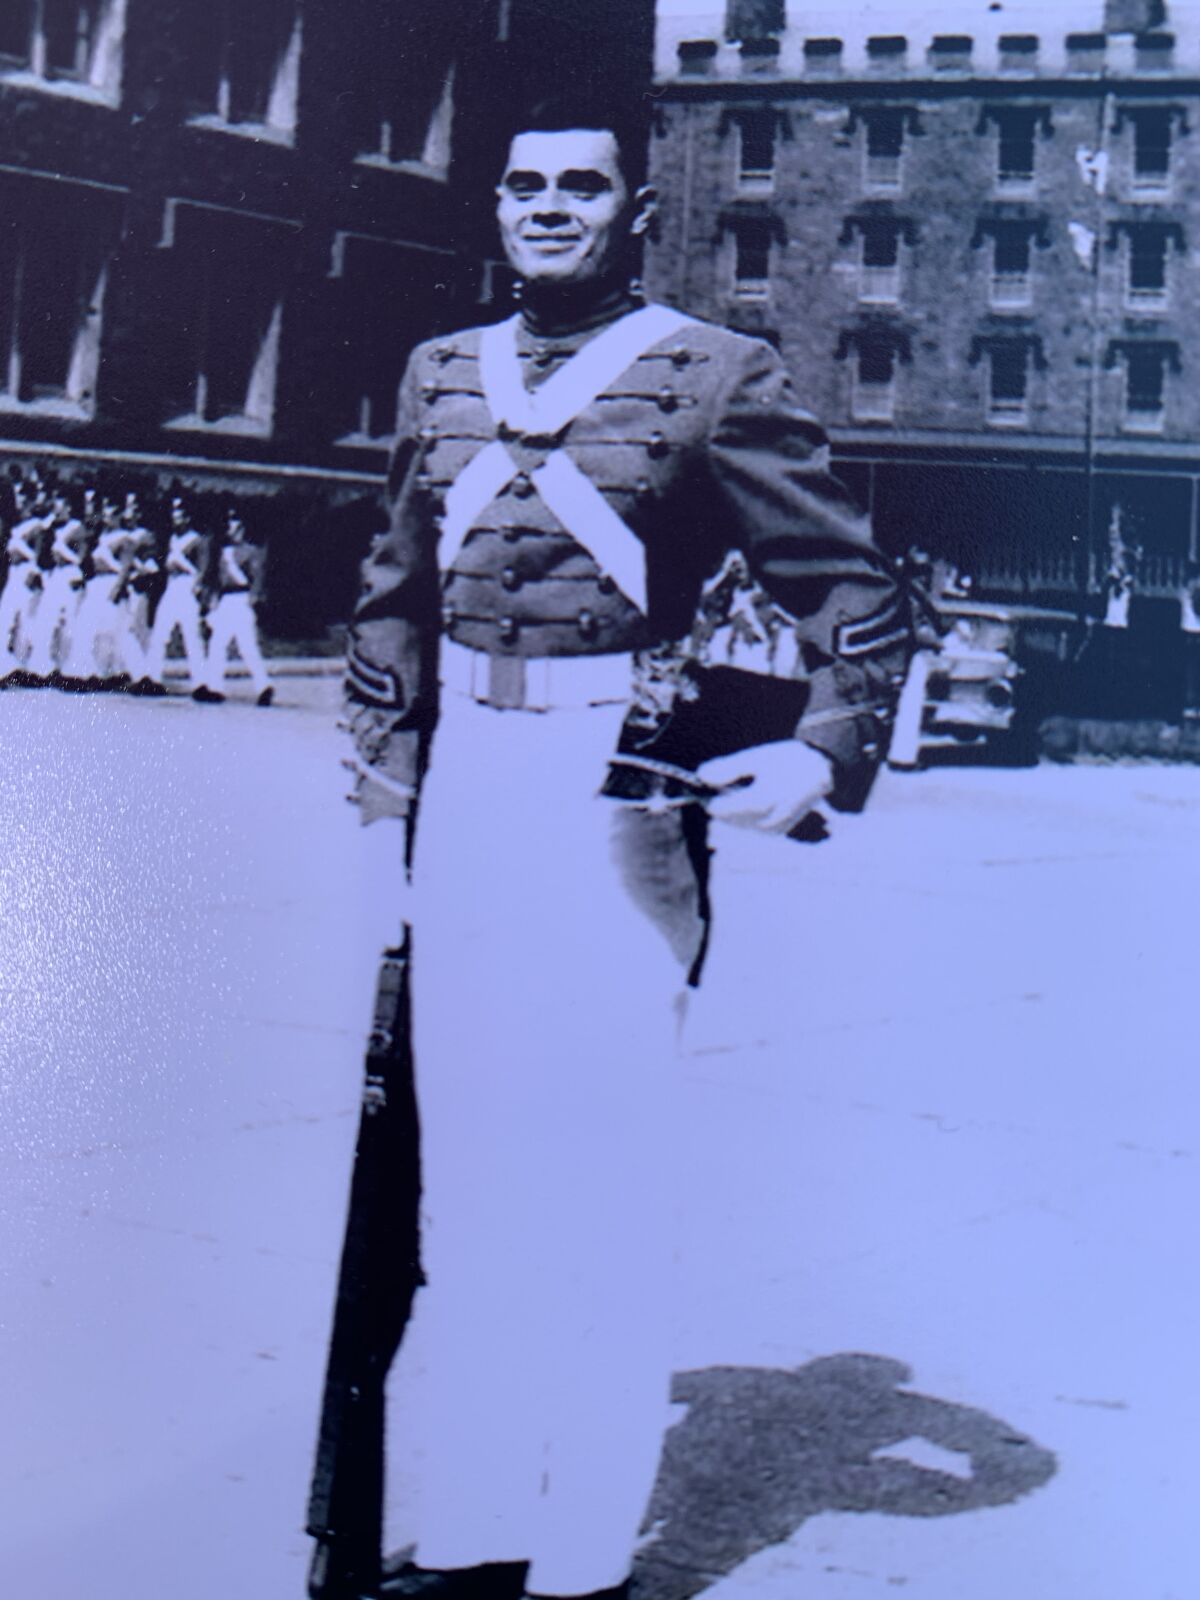 Jerry Cecil, Kate Hartford's grandfather, is pictured during his West Point years in the 1960s.